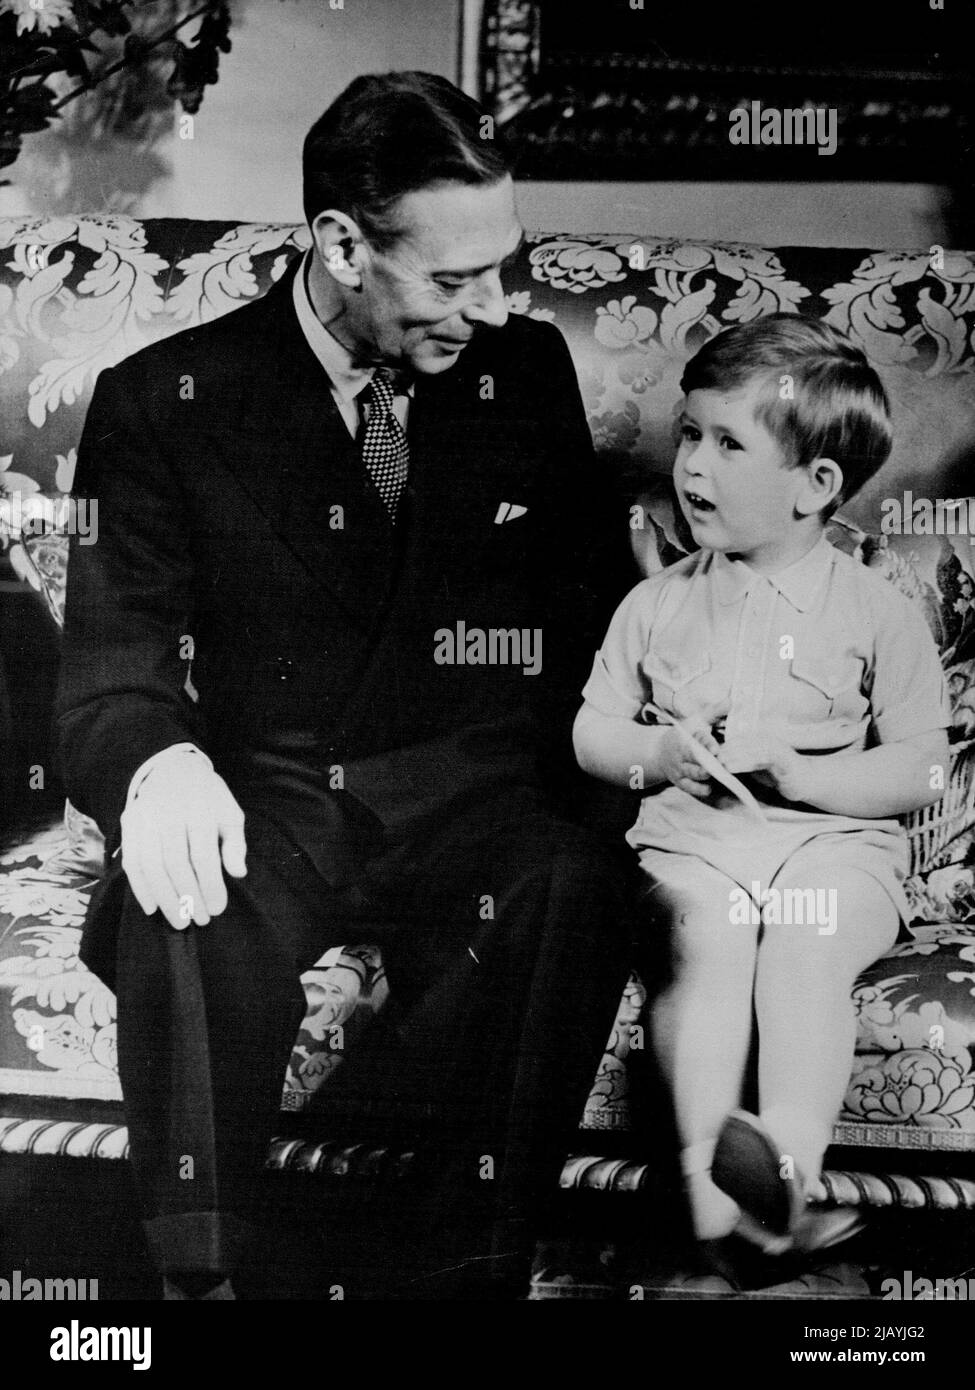 First Picture Of The King As He Celebrates Prince Charles Third Birthday -- The King with his grandson Prince Charles, at Buckingham Palace, London, today November 14. The Prince Celebrated his third Birthday anniversary today with a tea-party at the Palace. This is the first picture of the king since his recent serious unless. July 19, 1953. (Photo by Associated Press Photo). Stock Photo